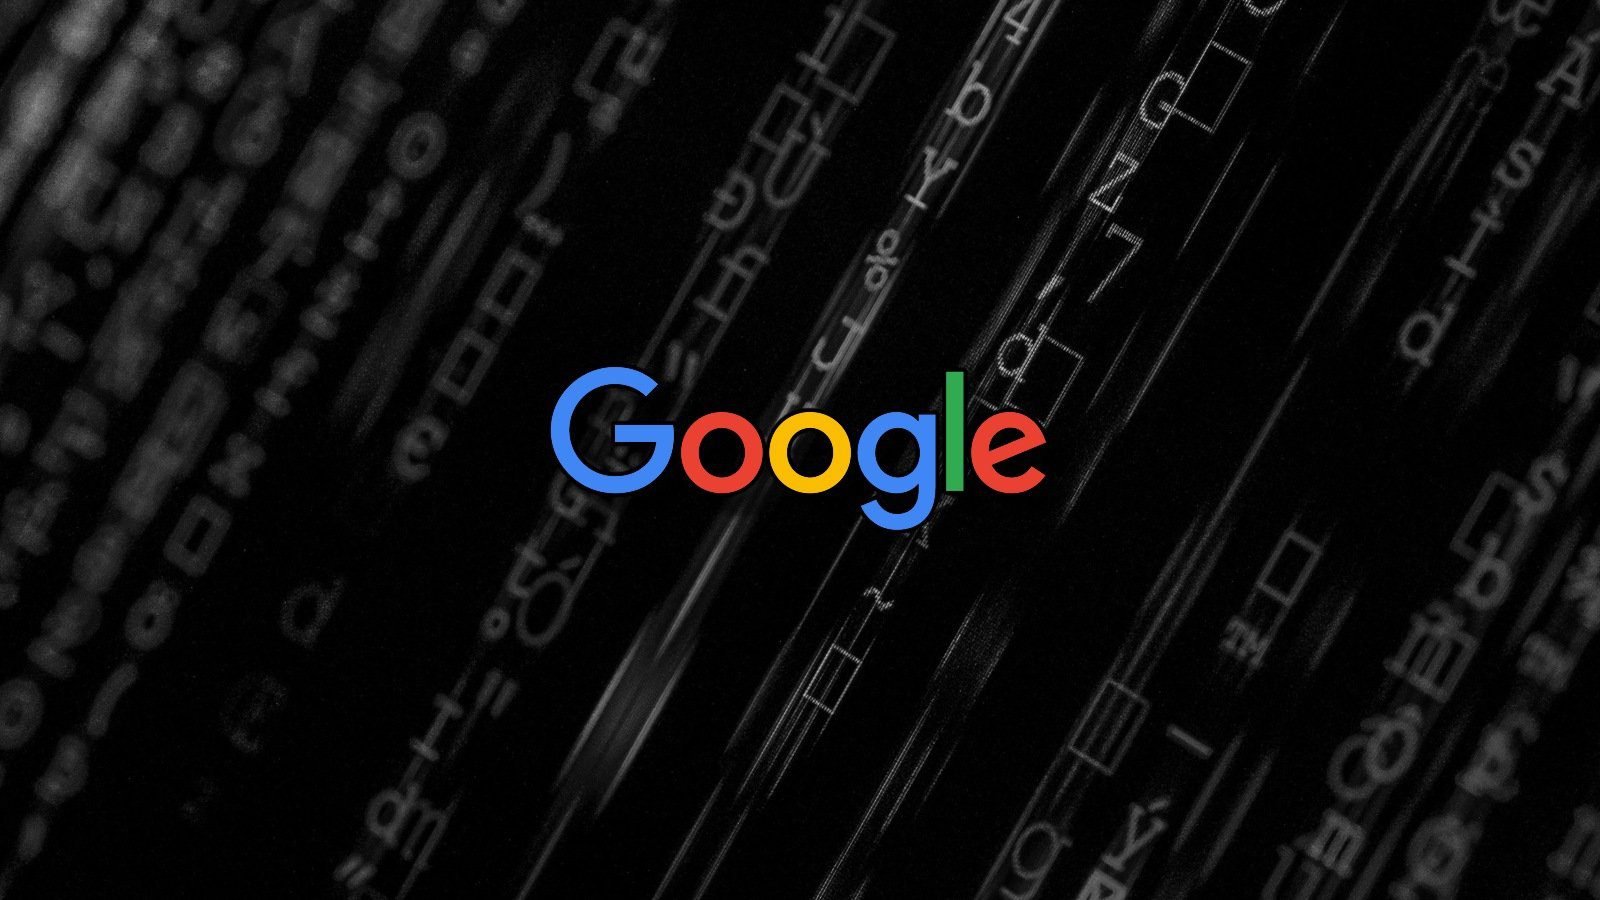 Google targets fake business reviews network in new lawsuit – Source: www.bleepingcomputer.com